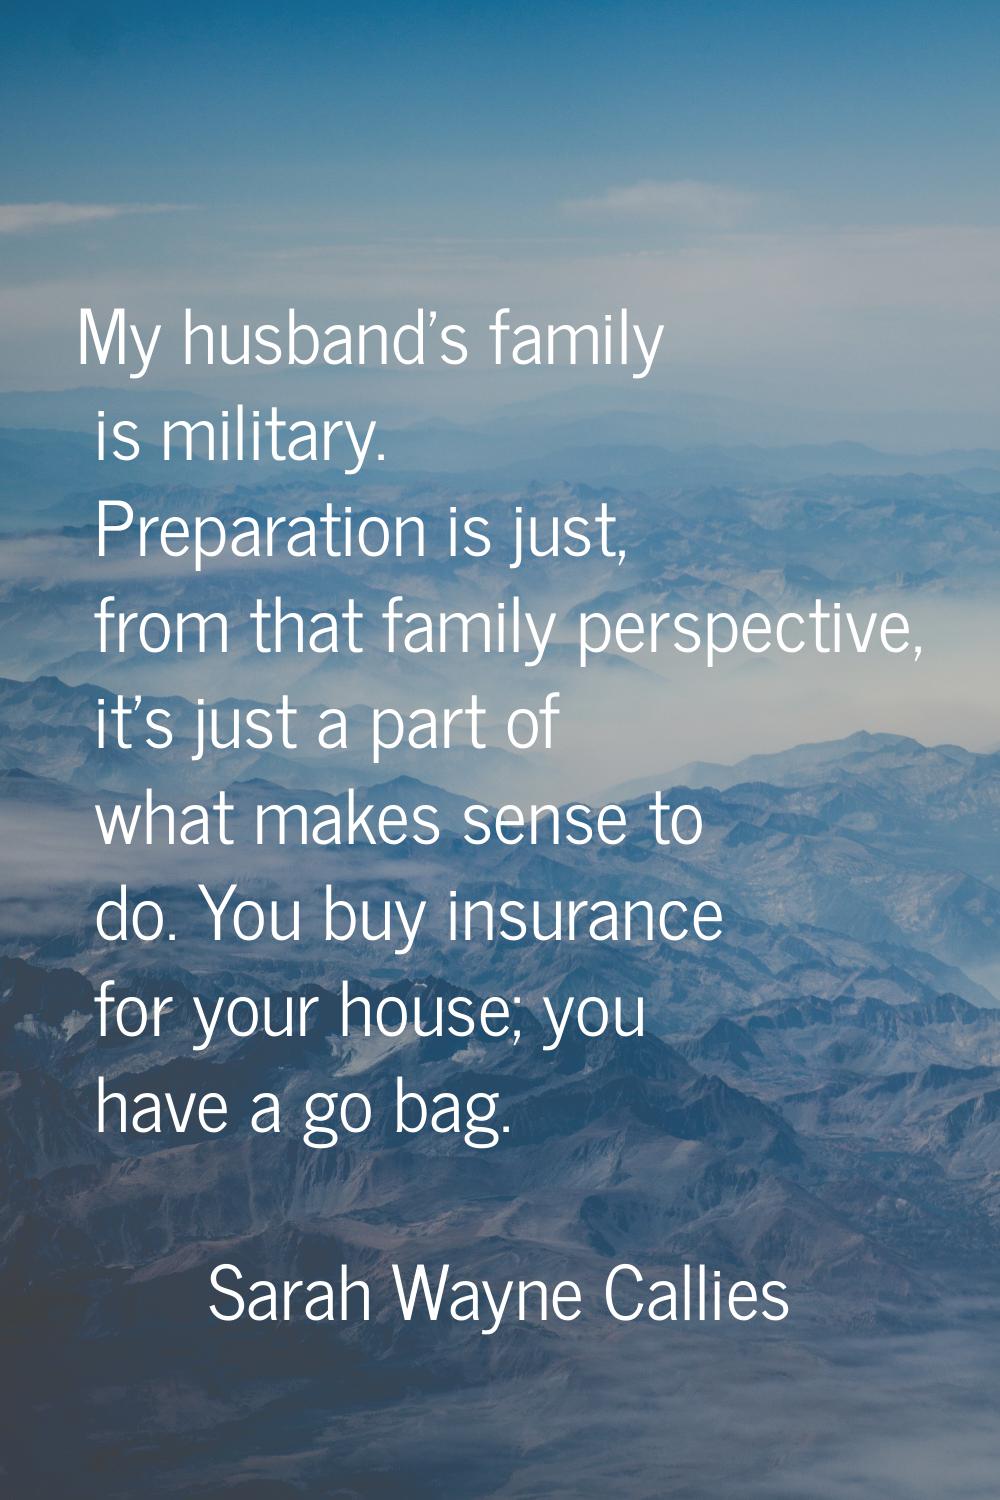 My husband's family is military. Preparation is just, from that family perspective, it's just a par